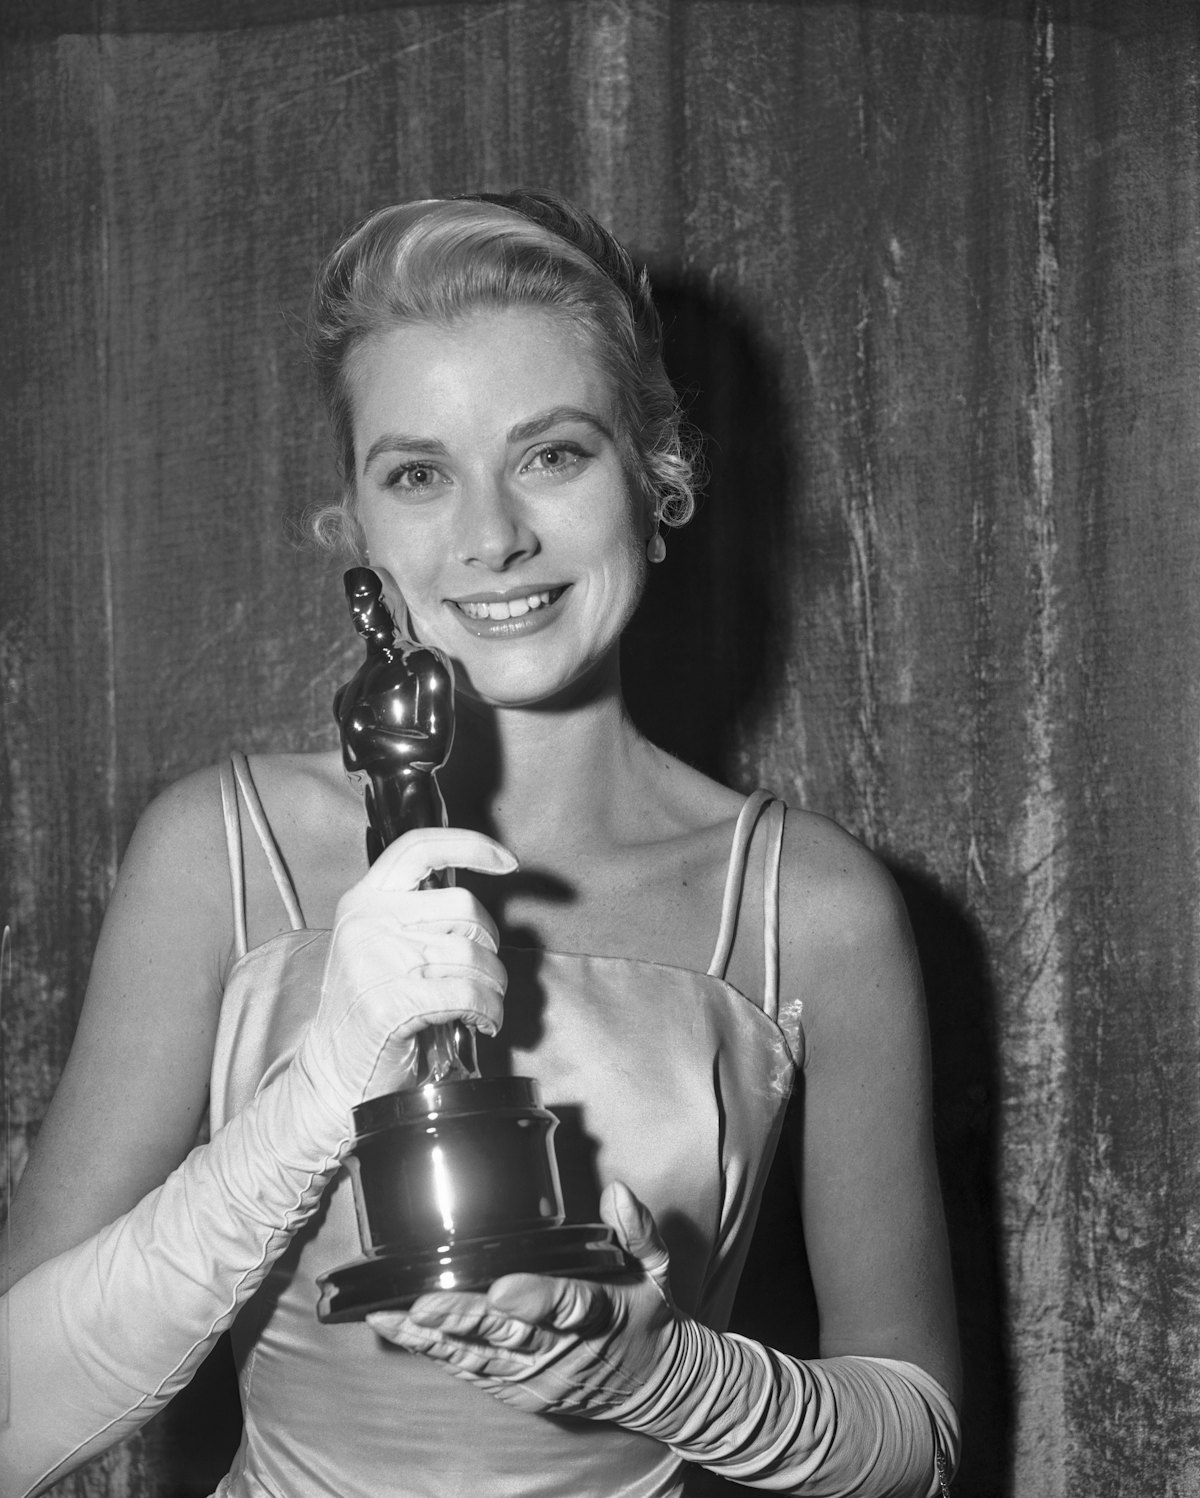 Oscars 15 Youngest Best Actress & Best Supporting Actress Winners Ever